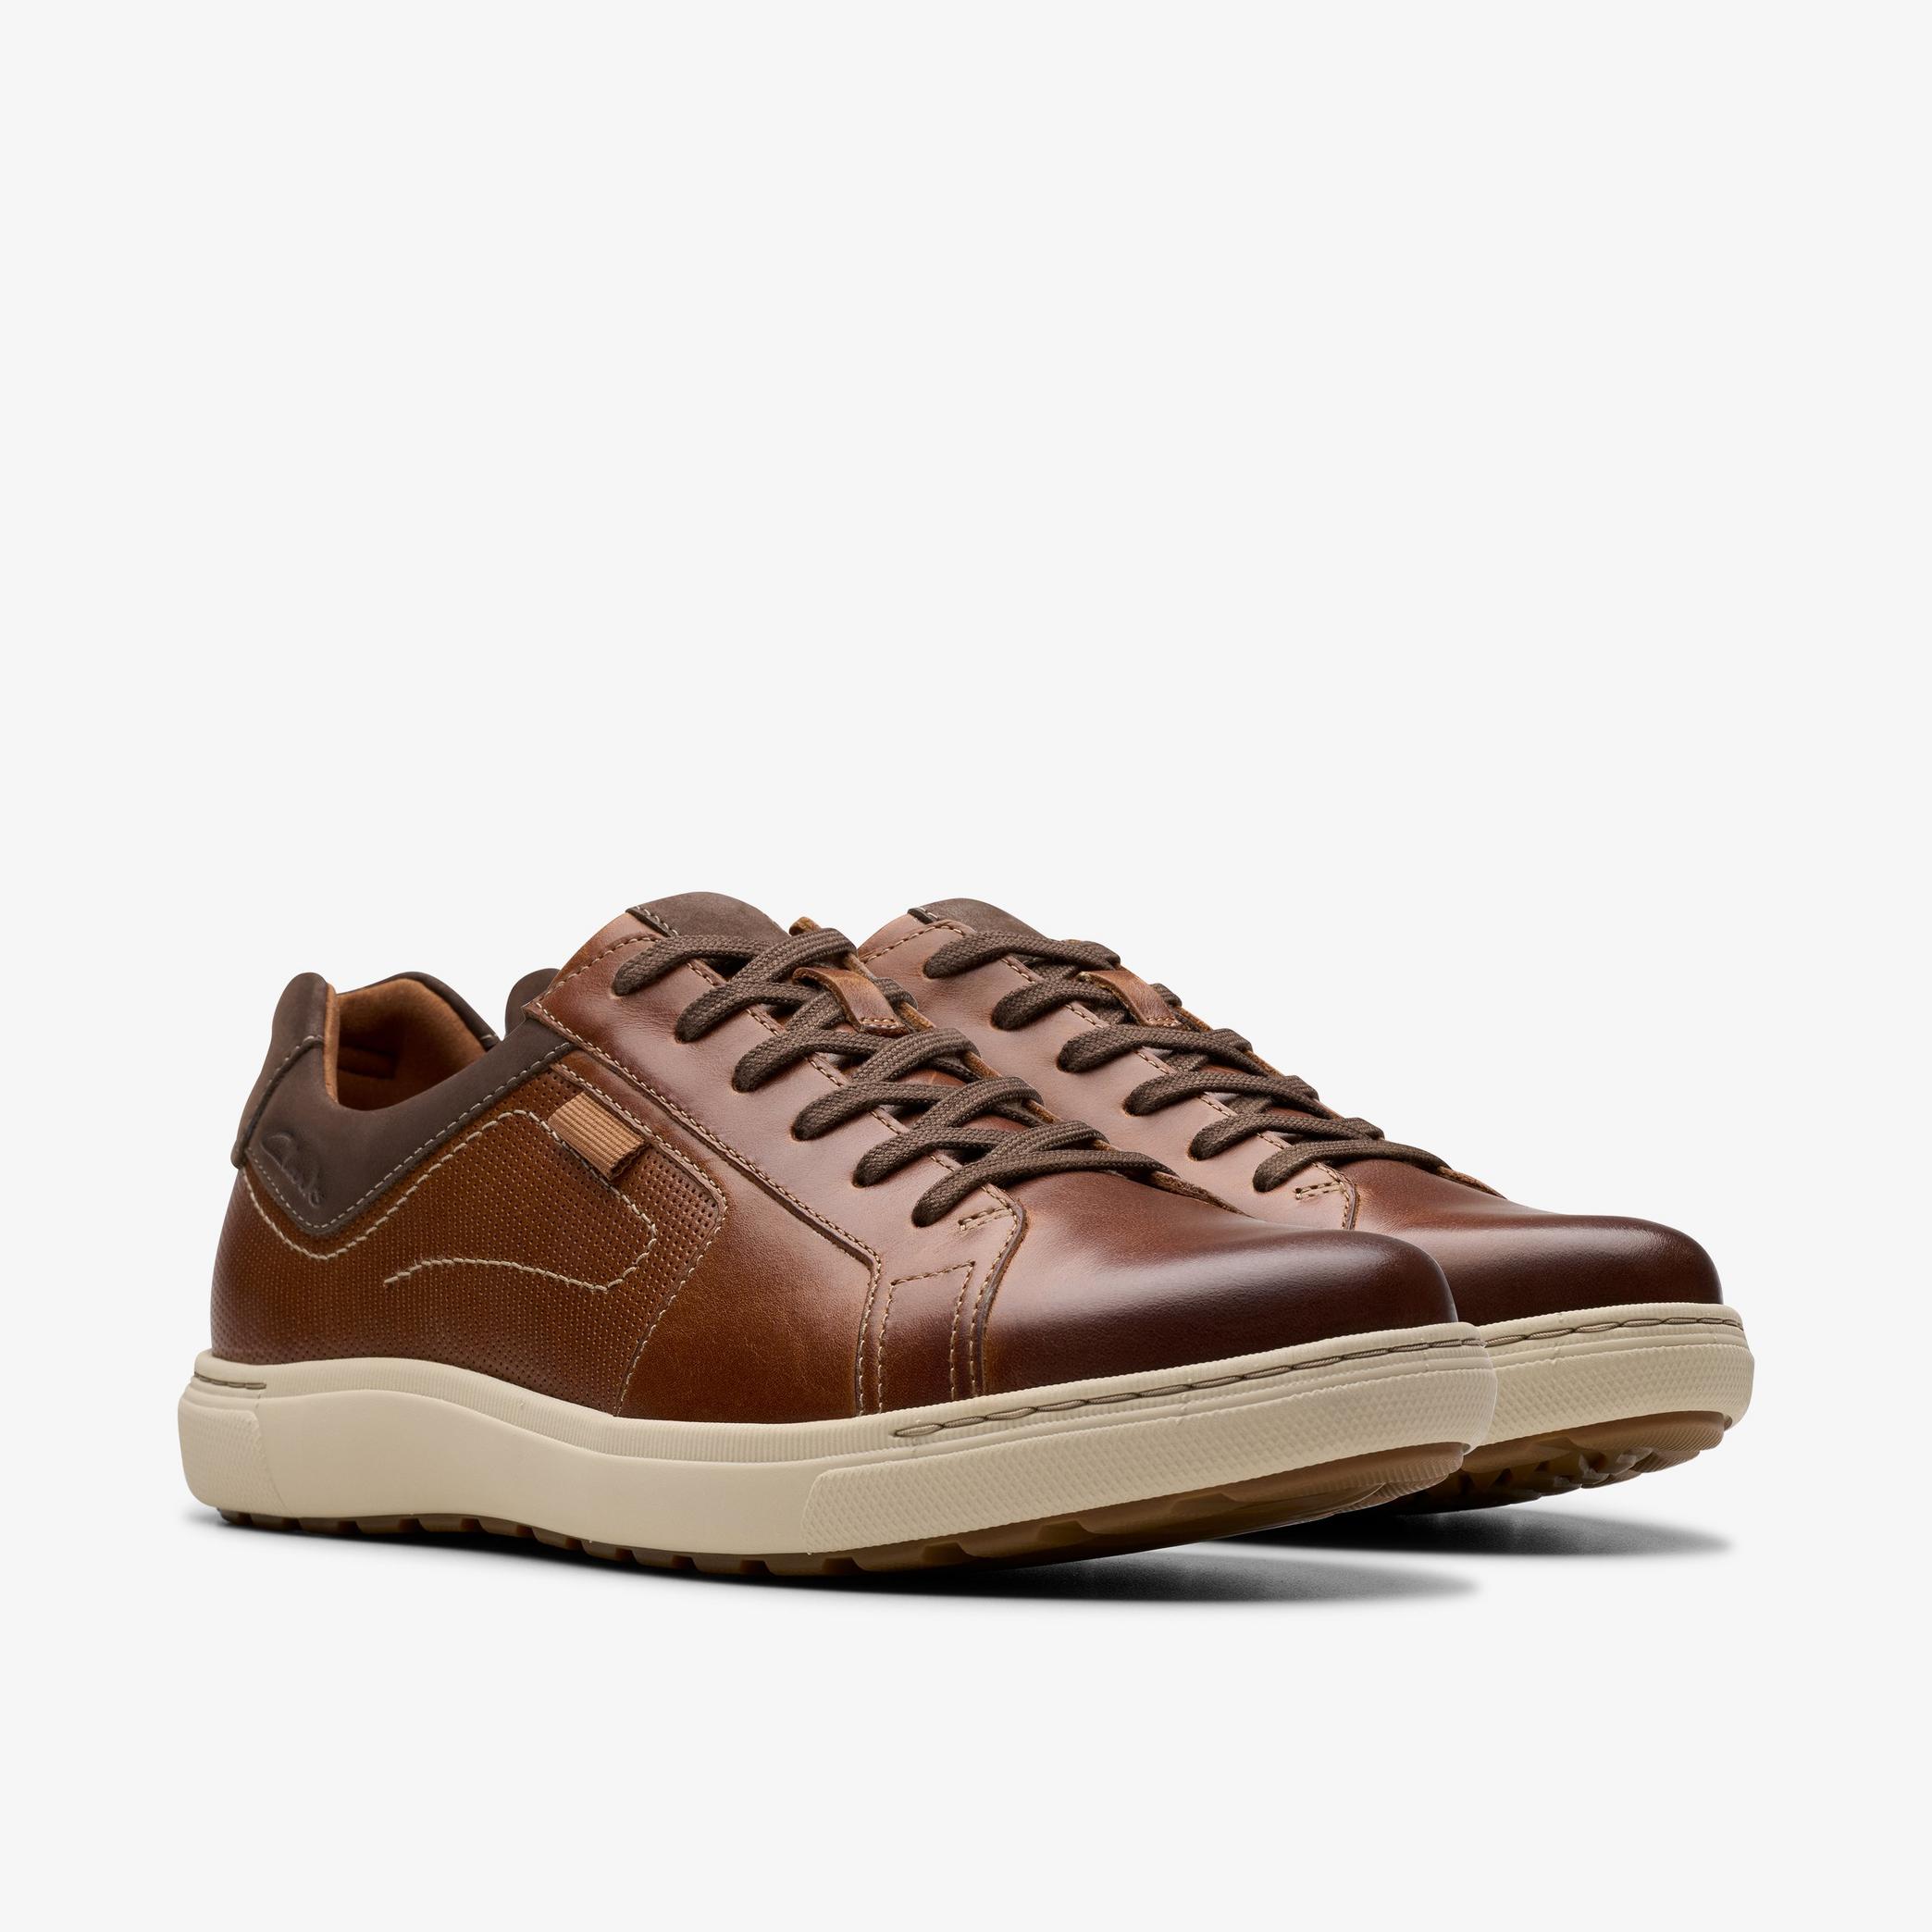 Mapstone Lace Tan Leather Sneakers, view 4 of 6